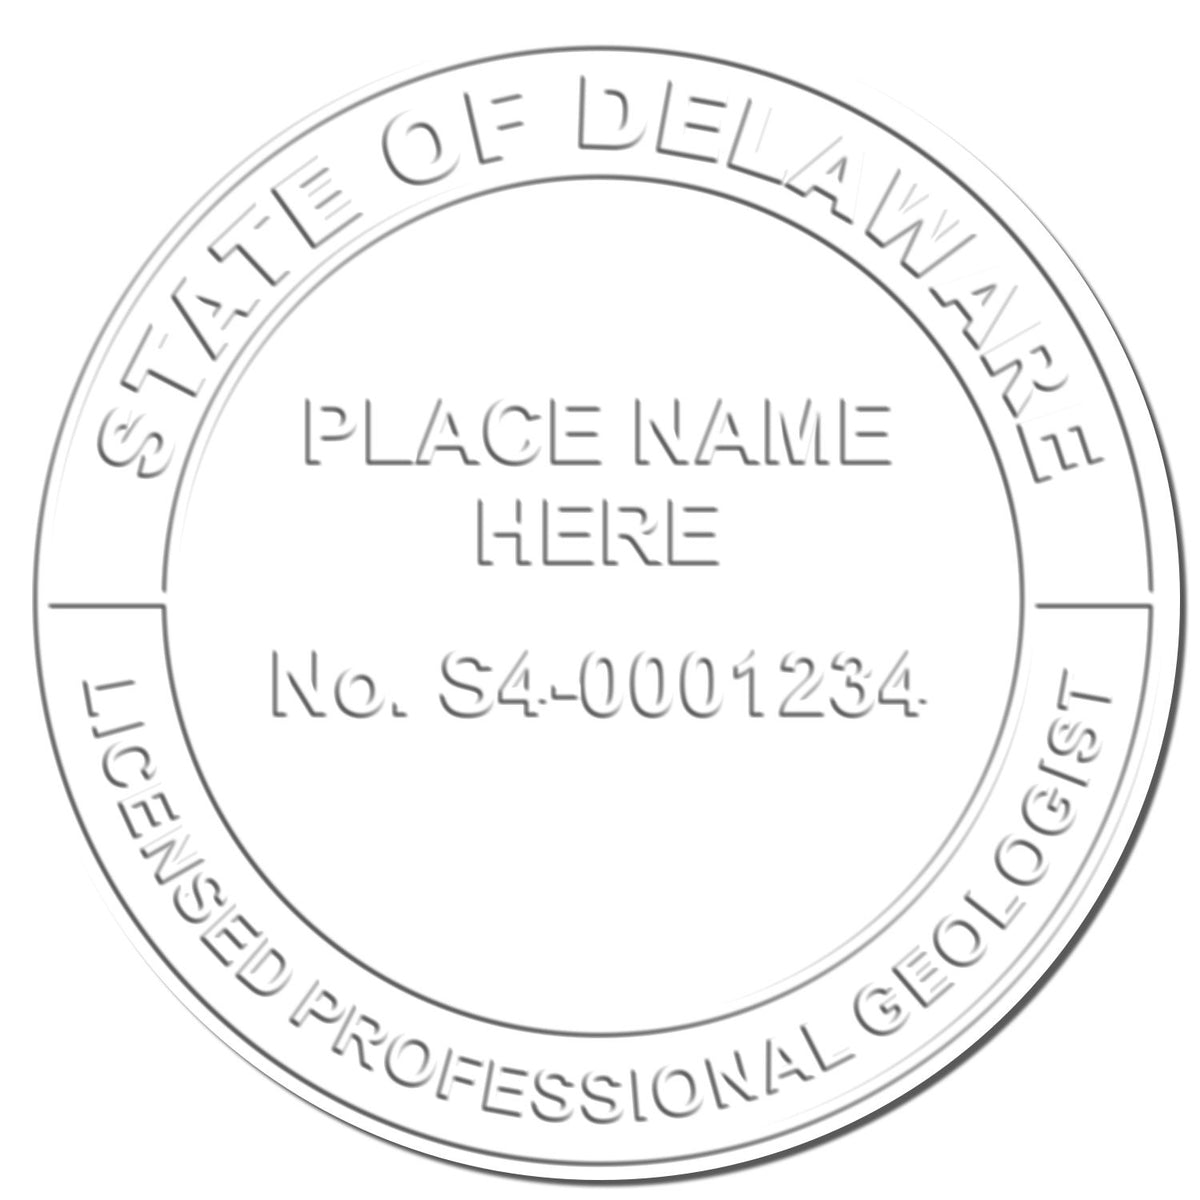 A stamped imprint of the Soft Delaware Professional Geologist Seal in this stylish lifestyle photo, setting the tone for a unique and personalized product.